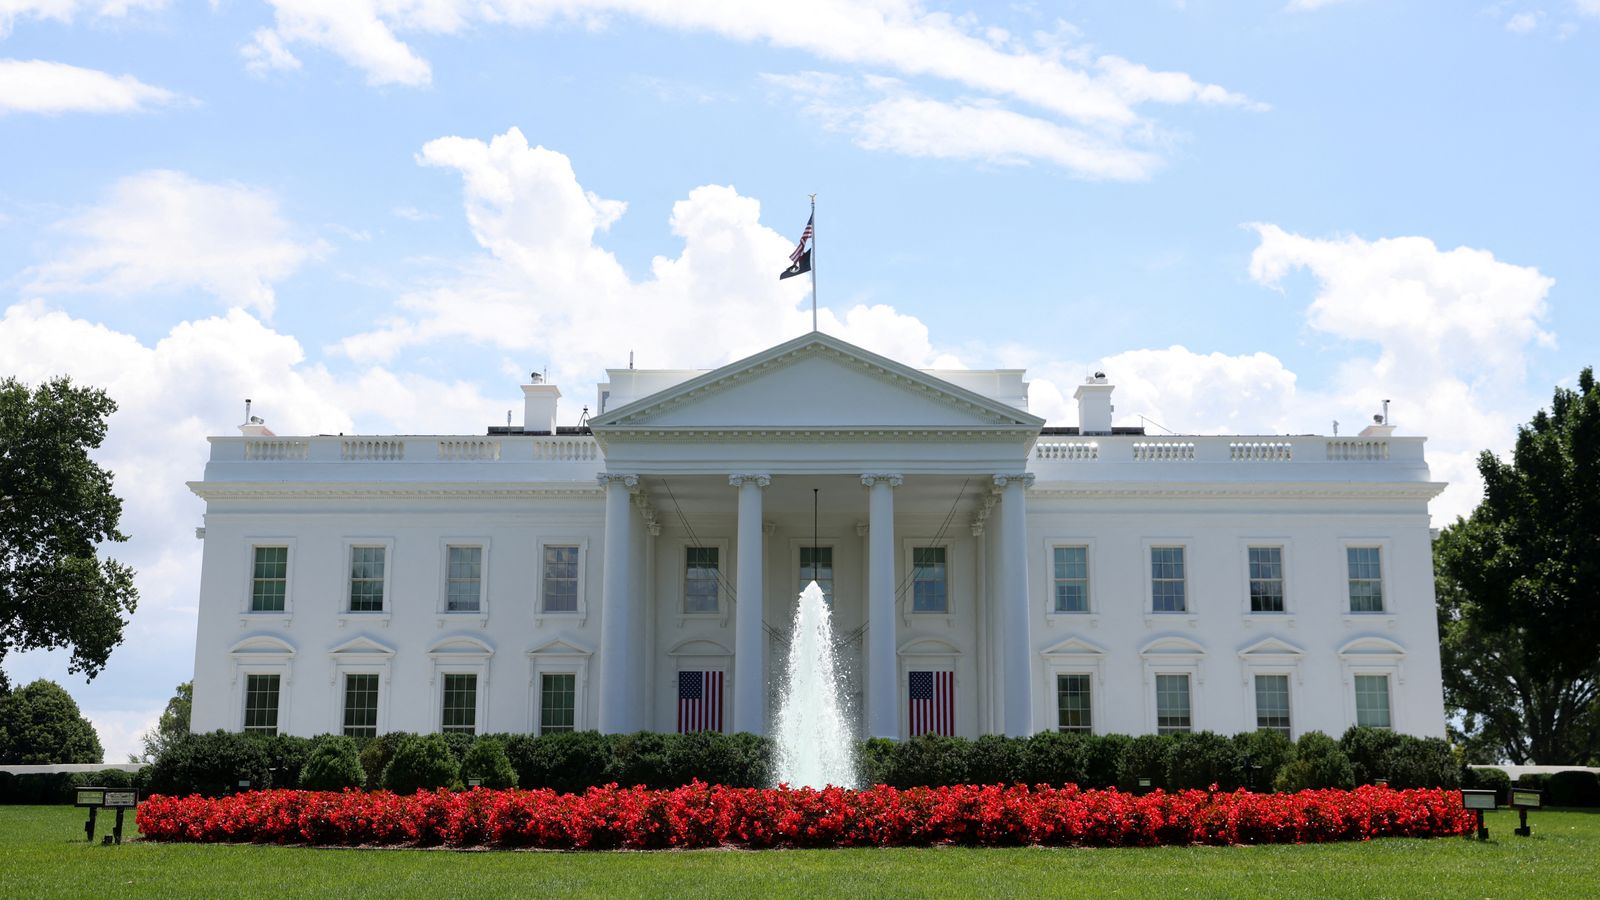 Suspicious powder which led to White House evacuation confirmed to be cocaine